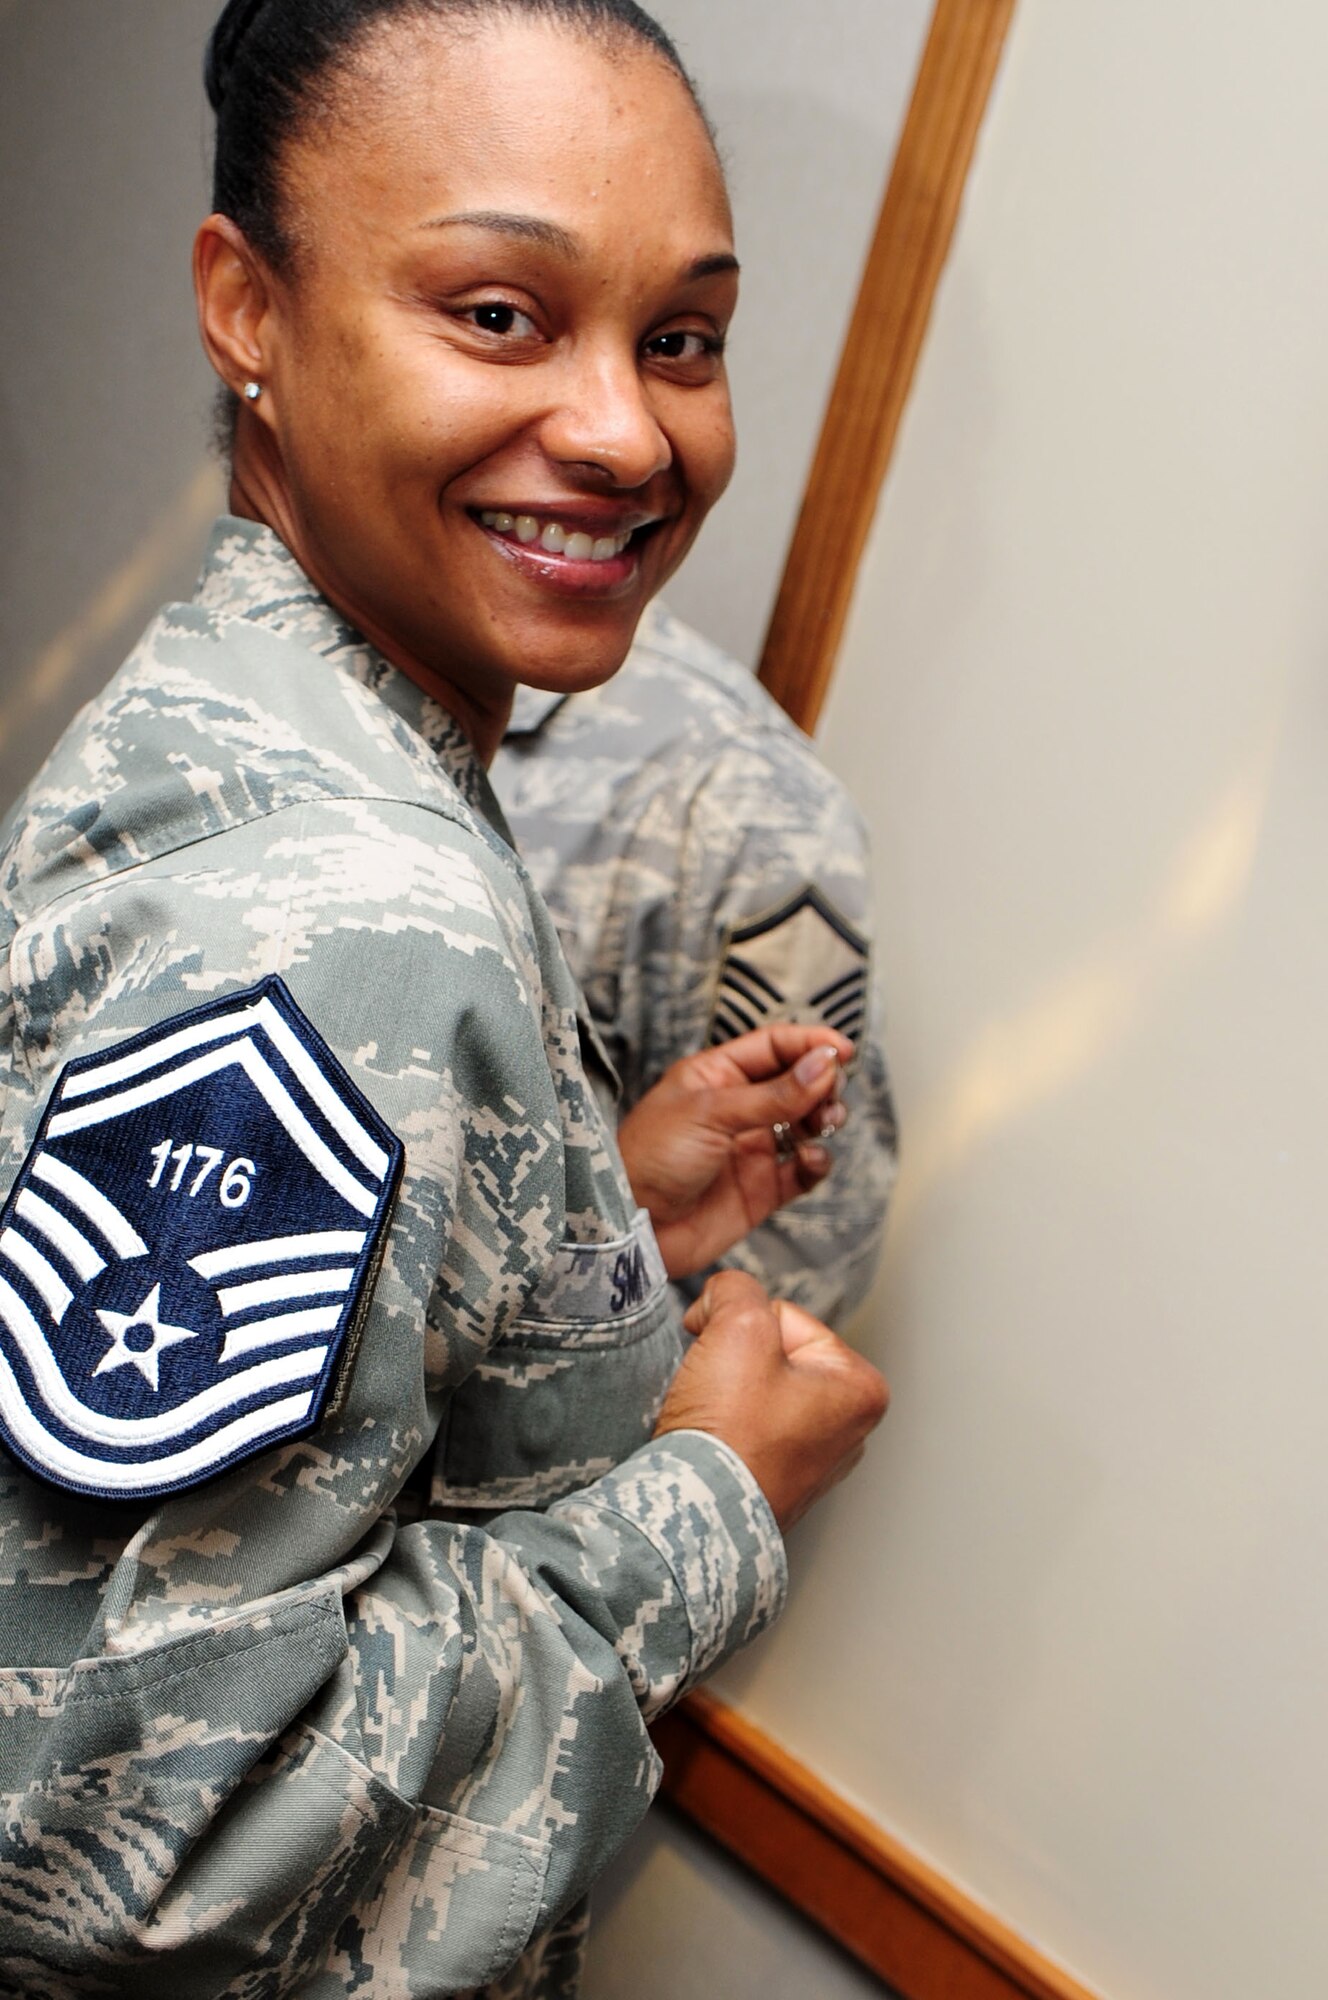 BARKSDALE AIR FORCE BASE, La. -- Master Sgt. Tizana Smith, 8th Air Force, shows off her new rank and line number during the senior master sergeant select party held at the Stripes Club March 9. (U.S. Air Force photo by Senior Airman Joanna M. Kresge)